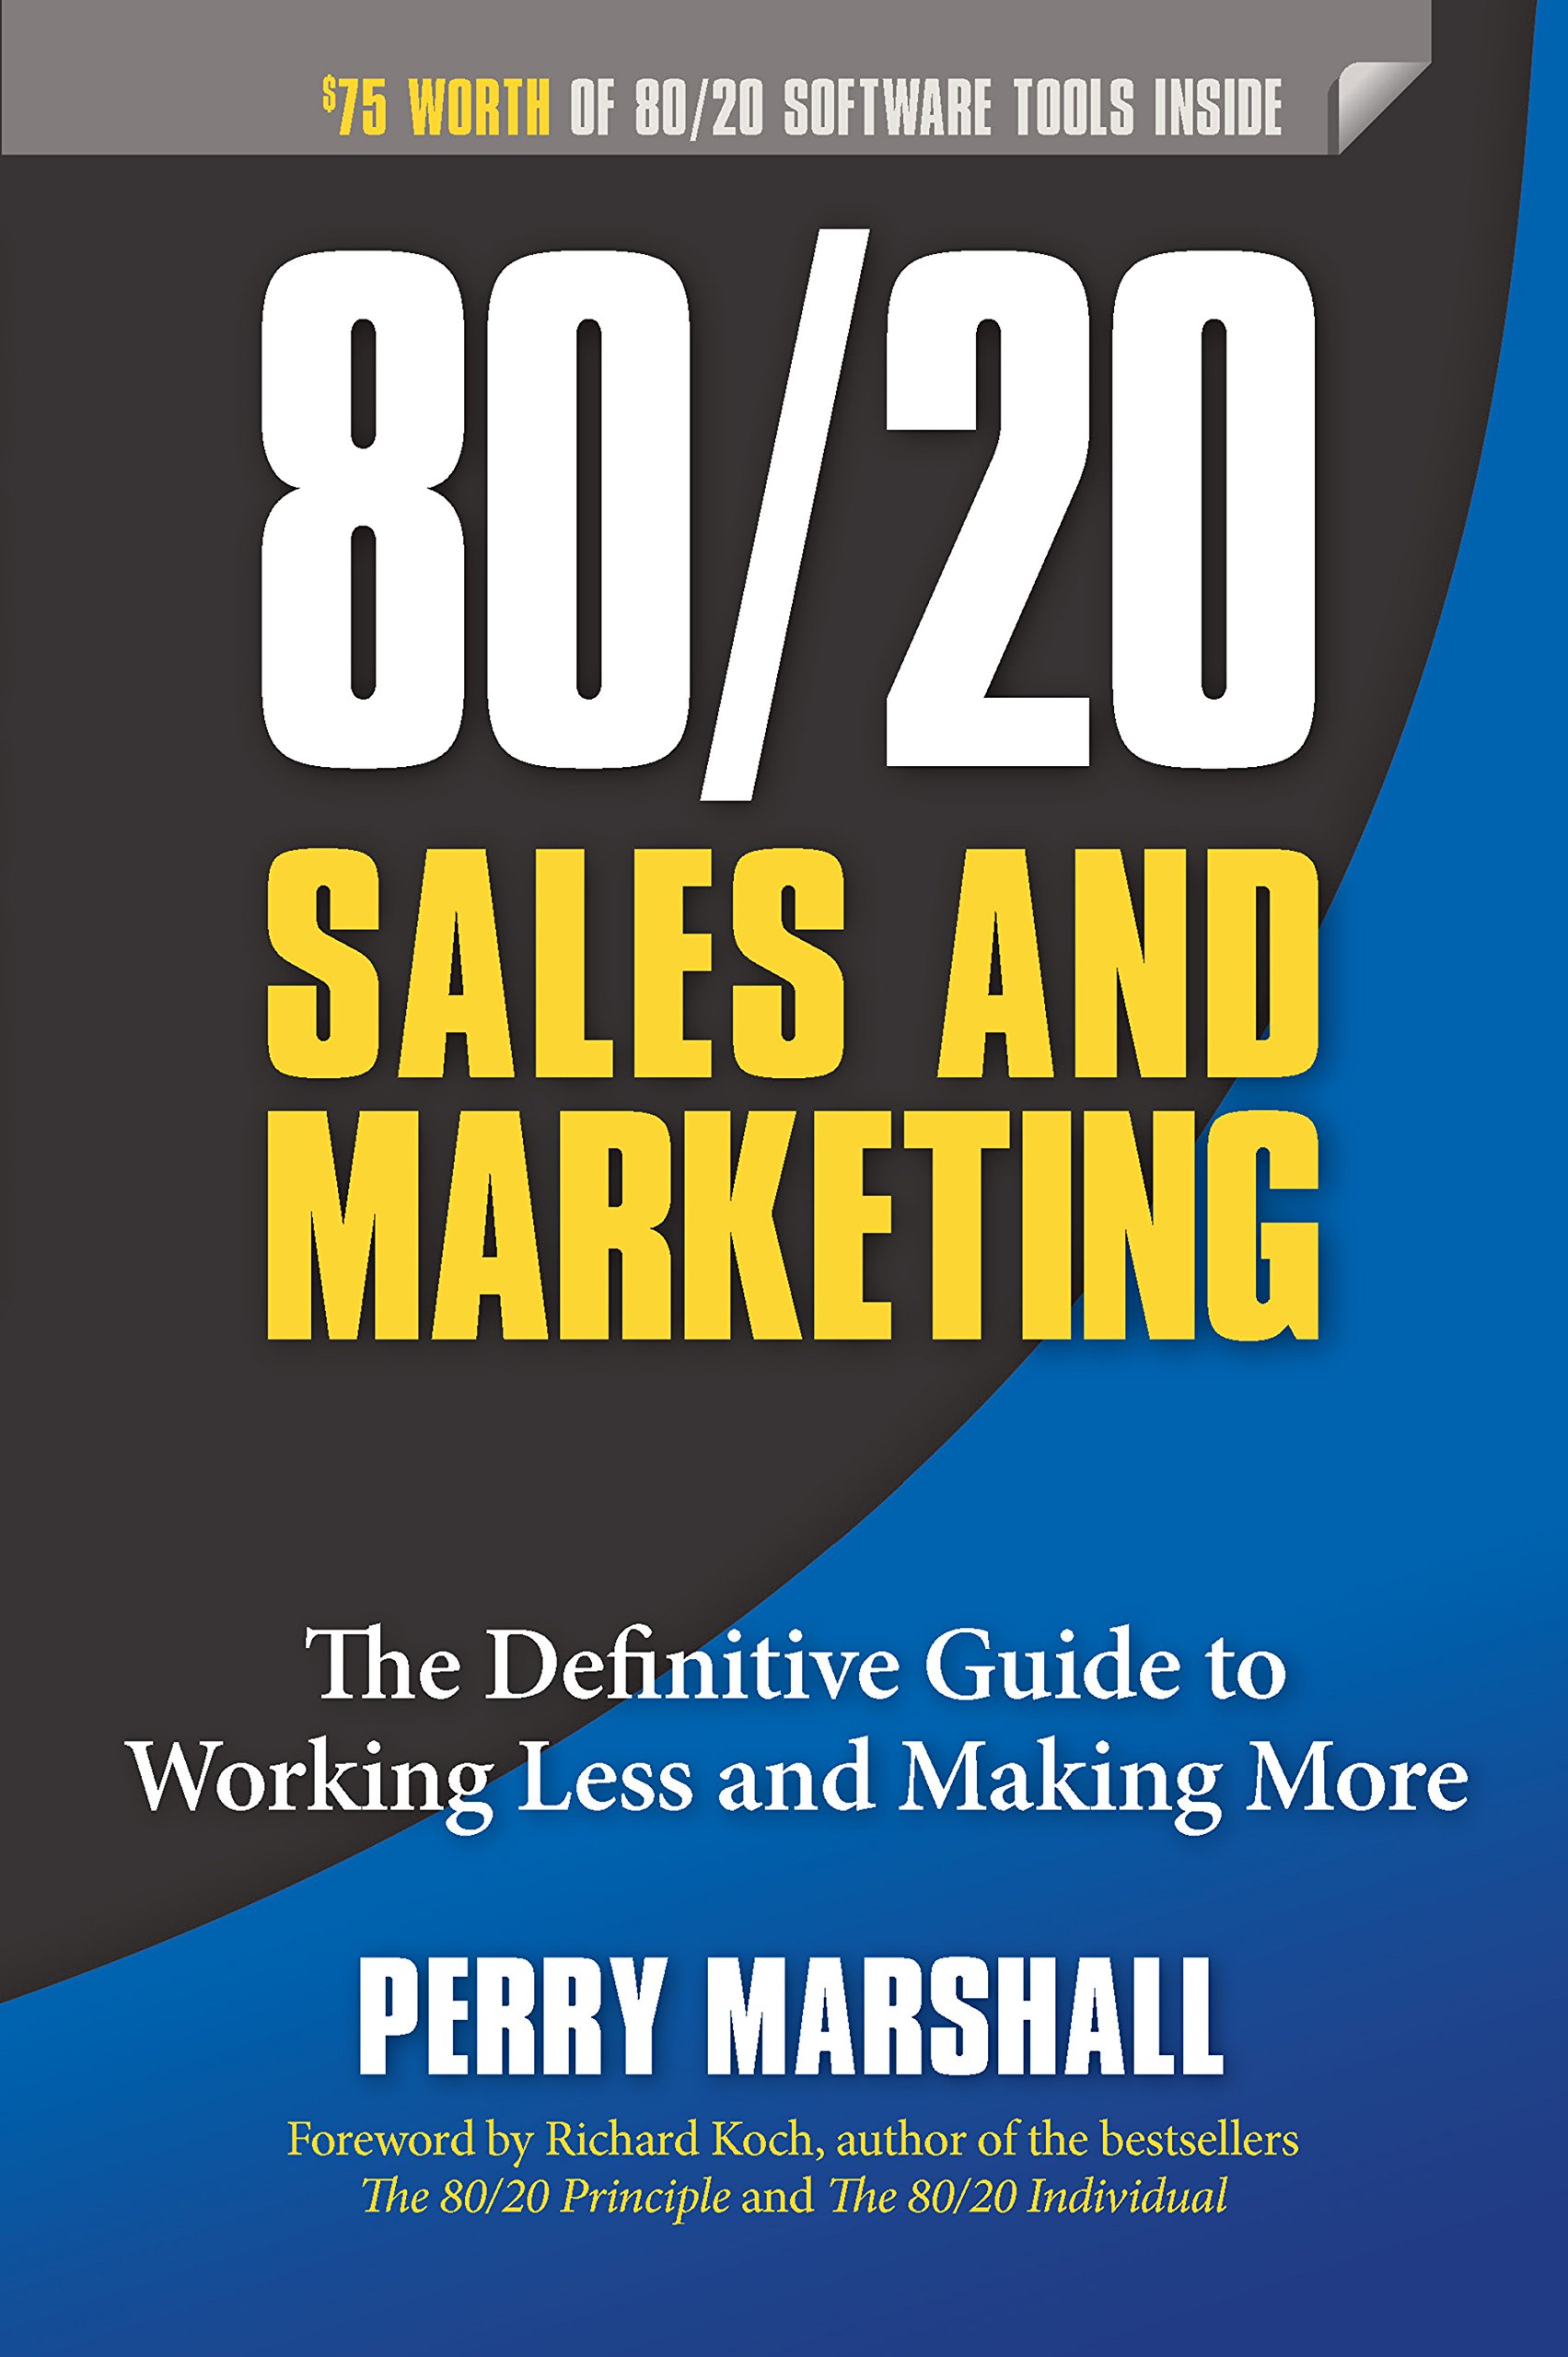 Book Cover 80/20 Sales and Marketing: The Definitive Guide to Working Less and Making More